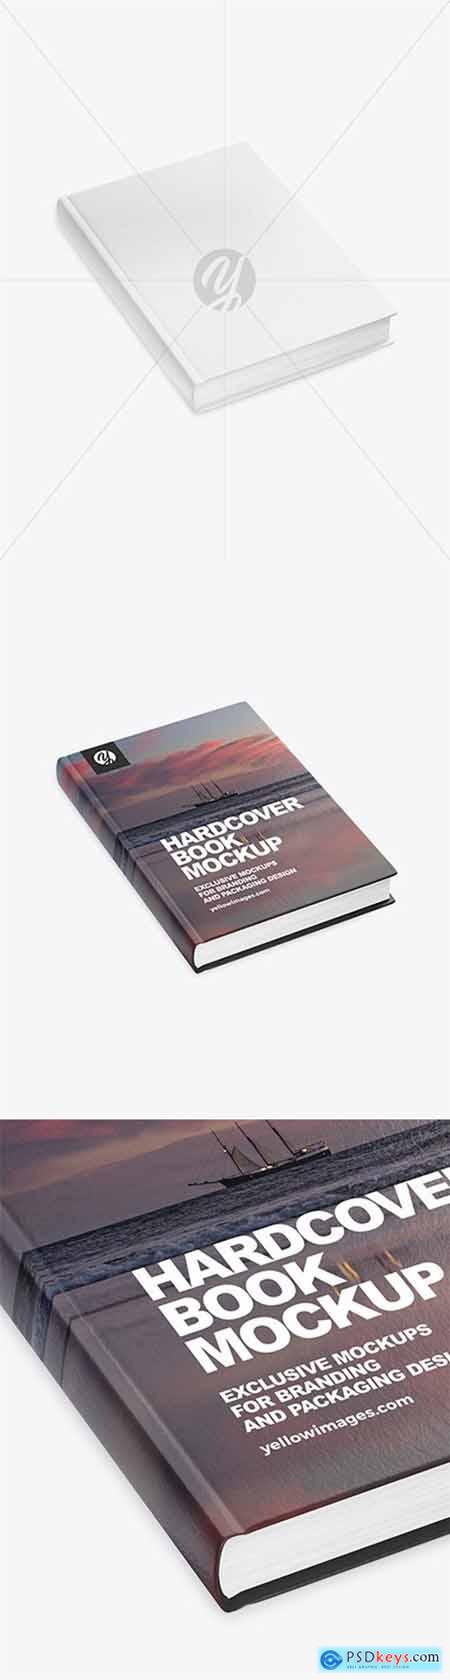 Download Hardcover Book Mockup 60693 Free Download Photoshop Vector Stock Image Via Torrent Zippyshare From Psdkeys Com Yellowimages Mockups